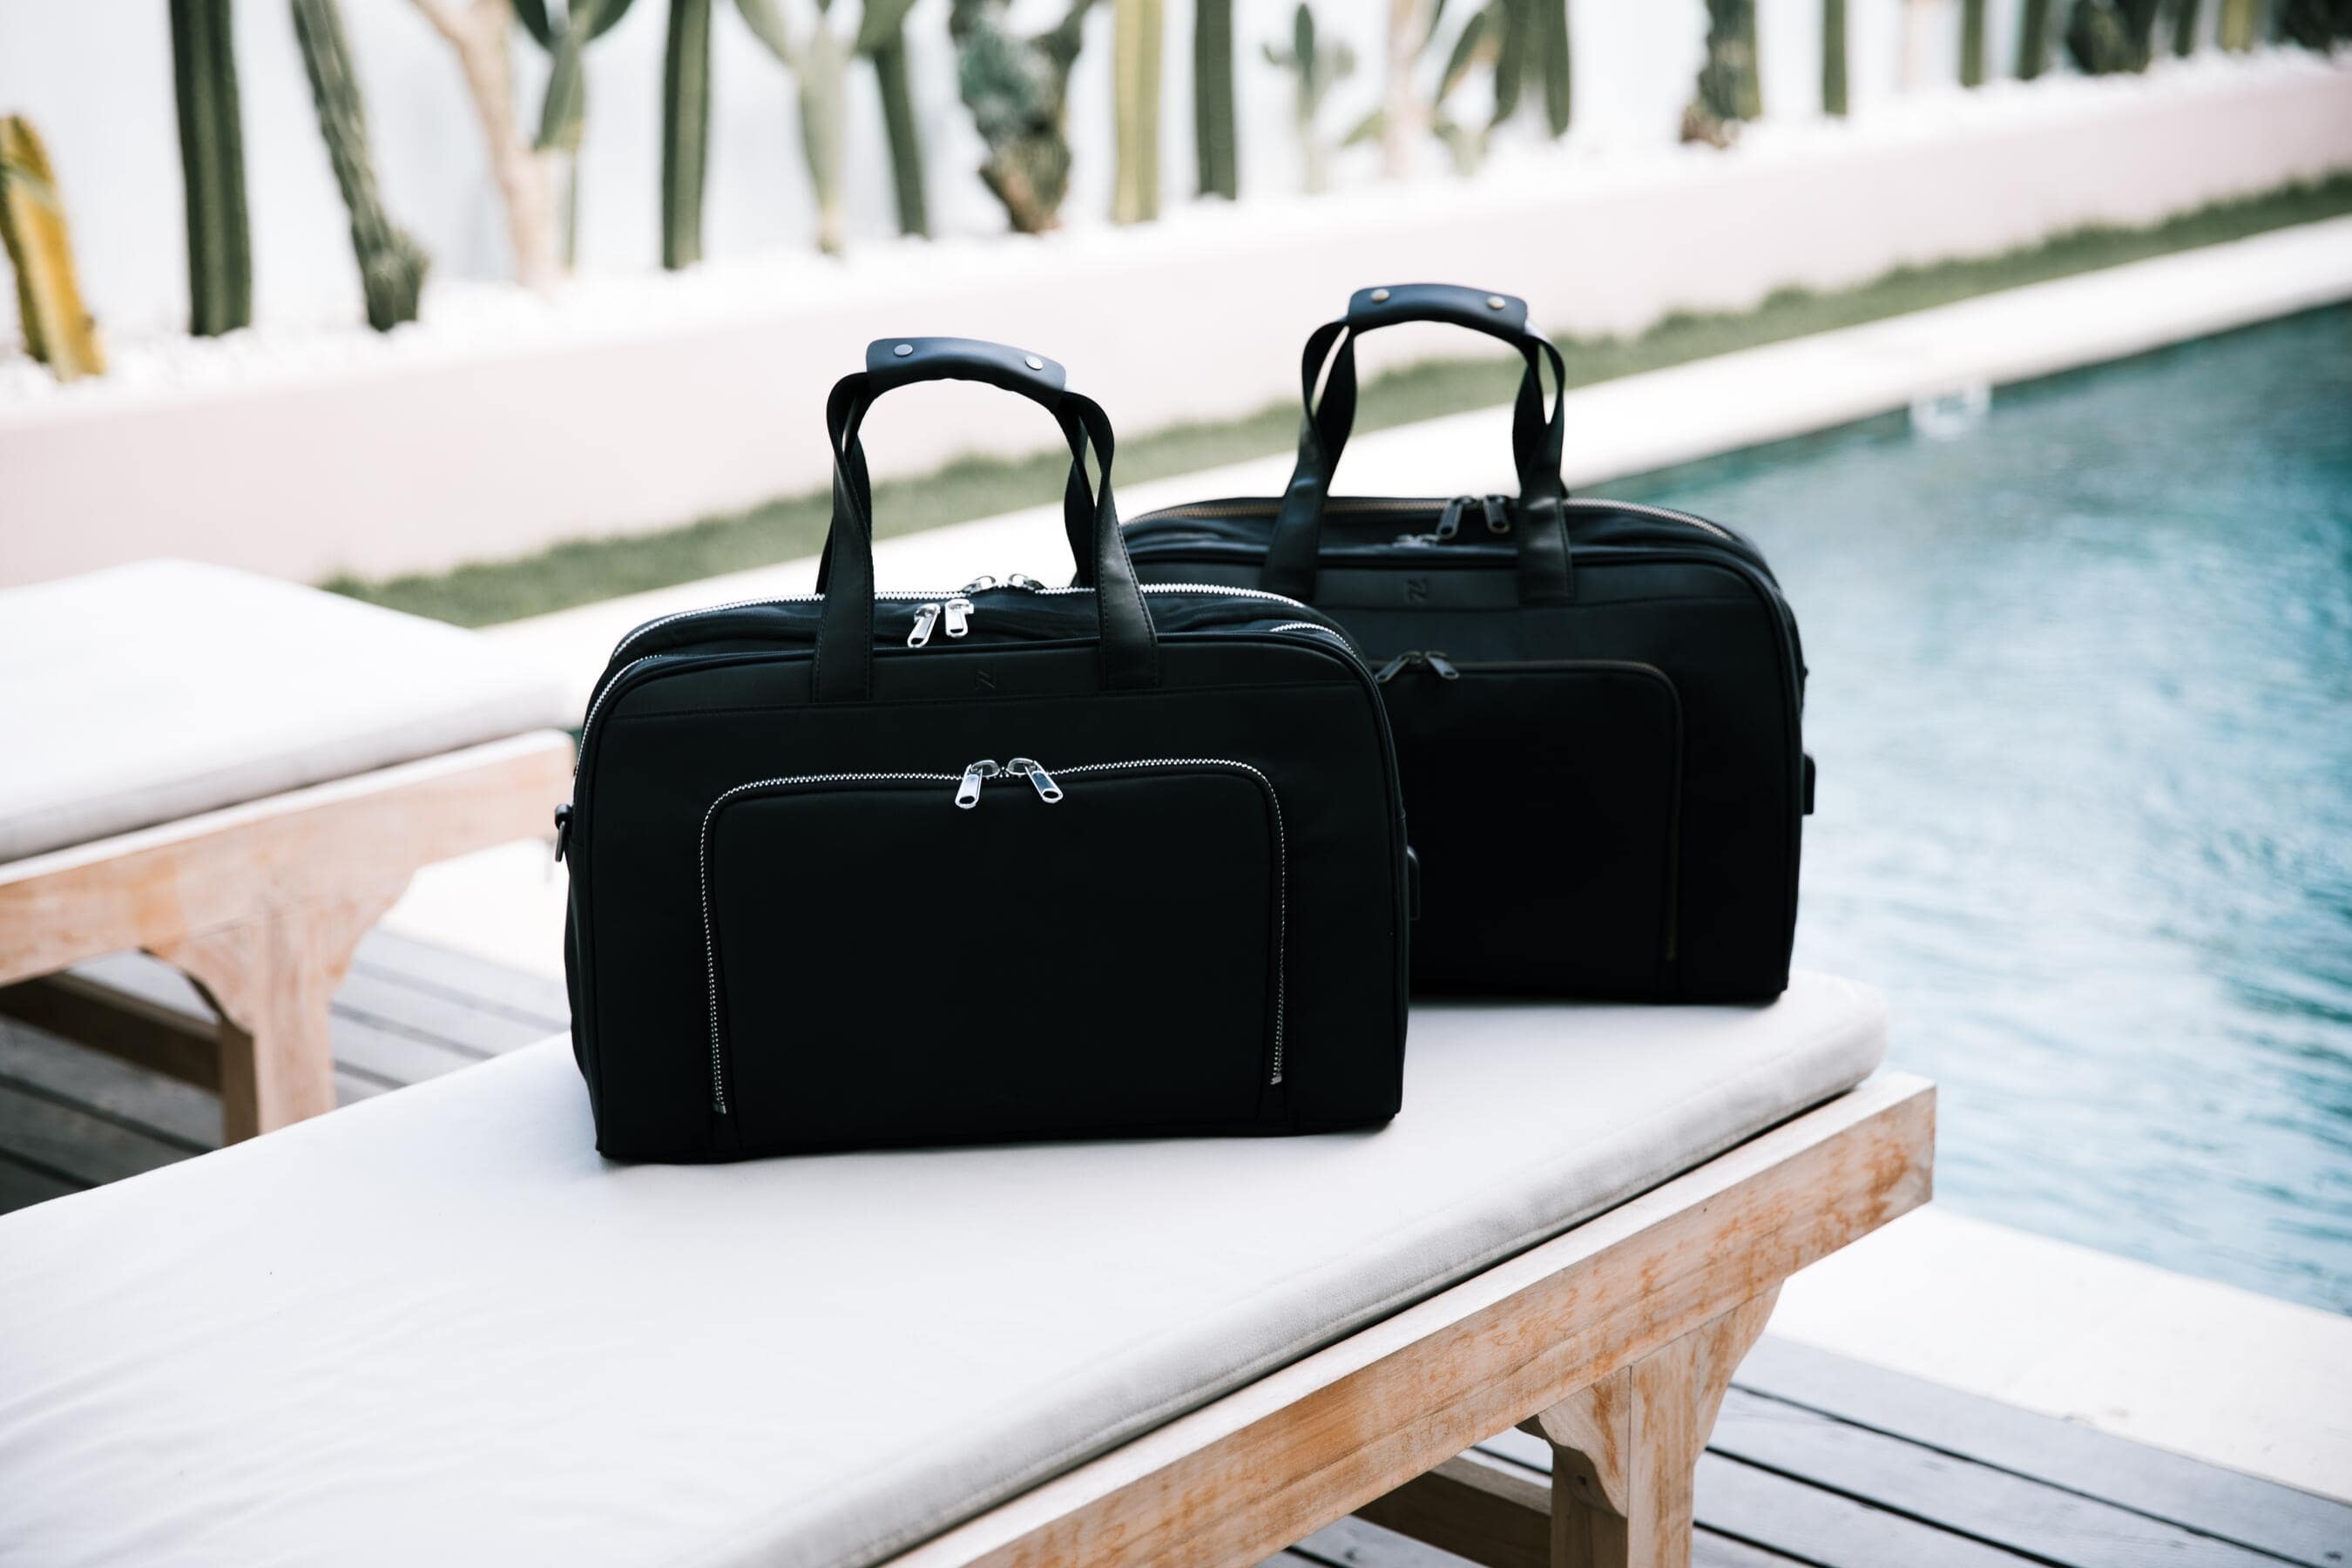 Fodor's Expert Review: Nomad Lane's Bento Bag, a Briefcase for Business  Travelers and Digital Nomads